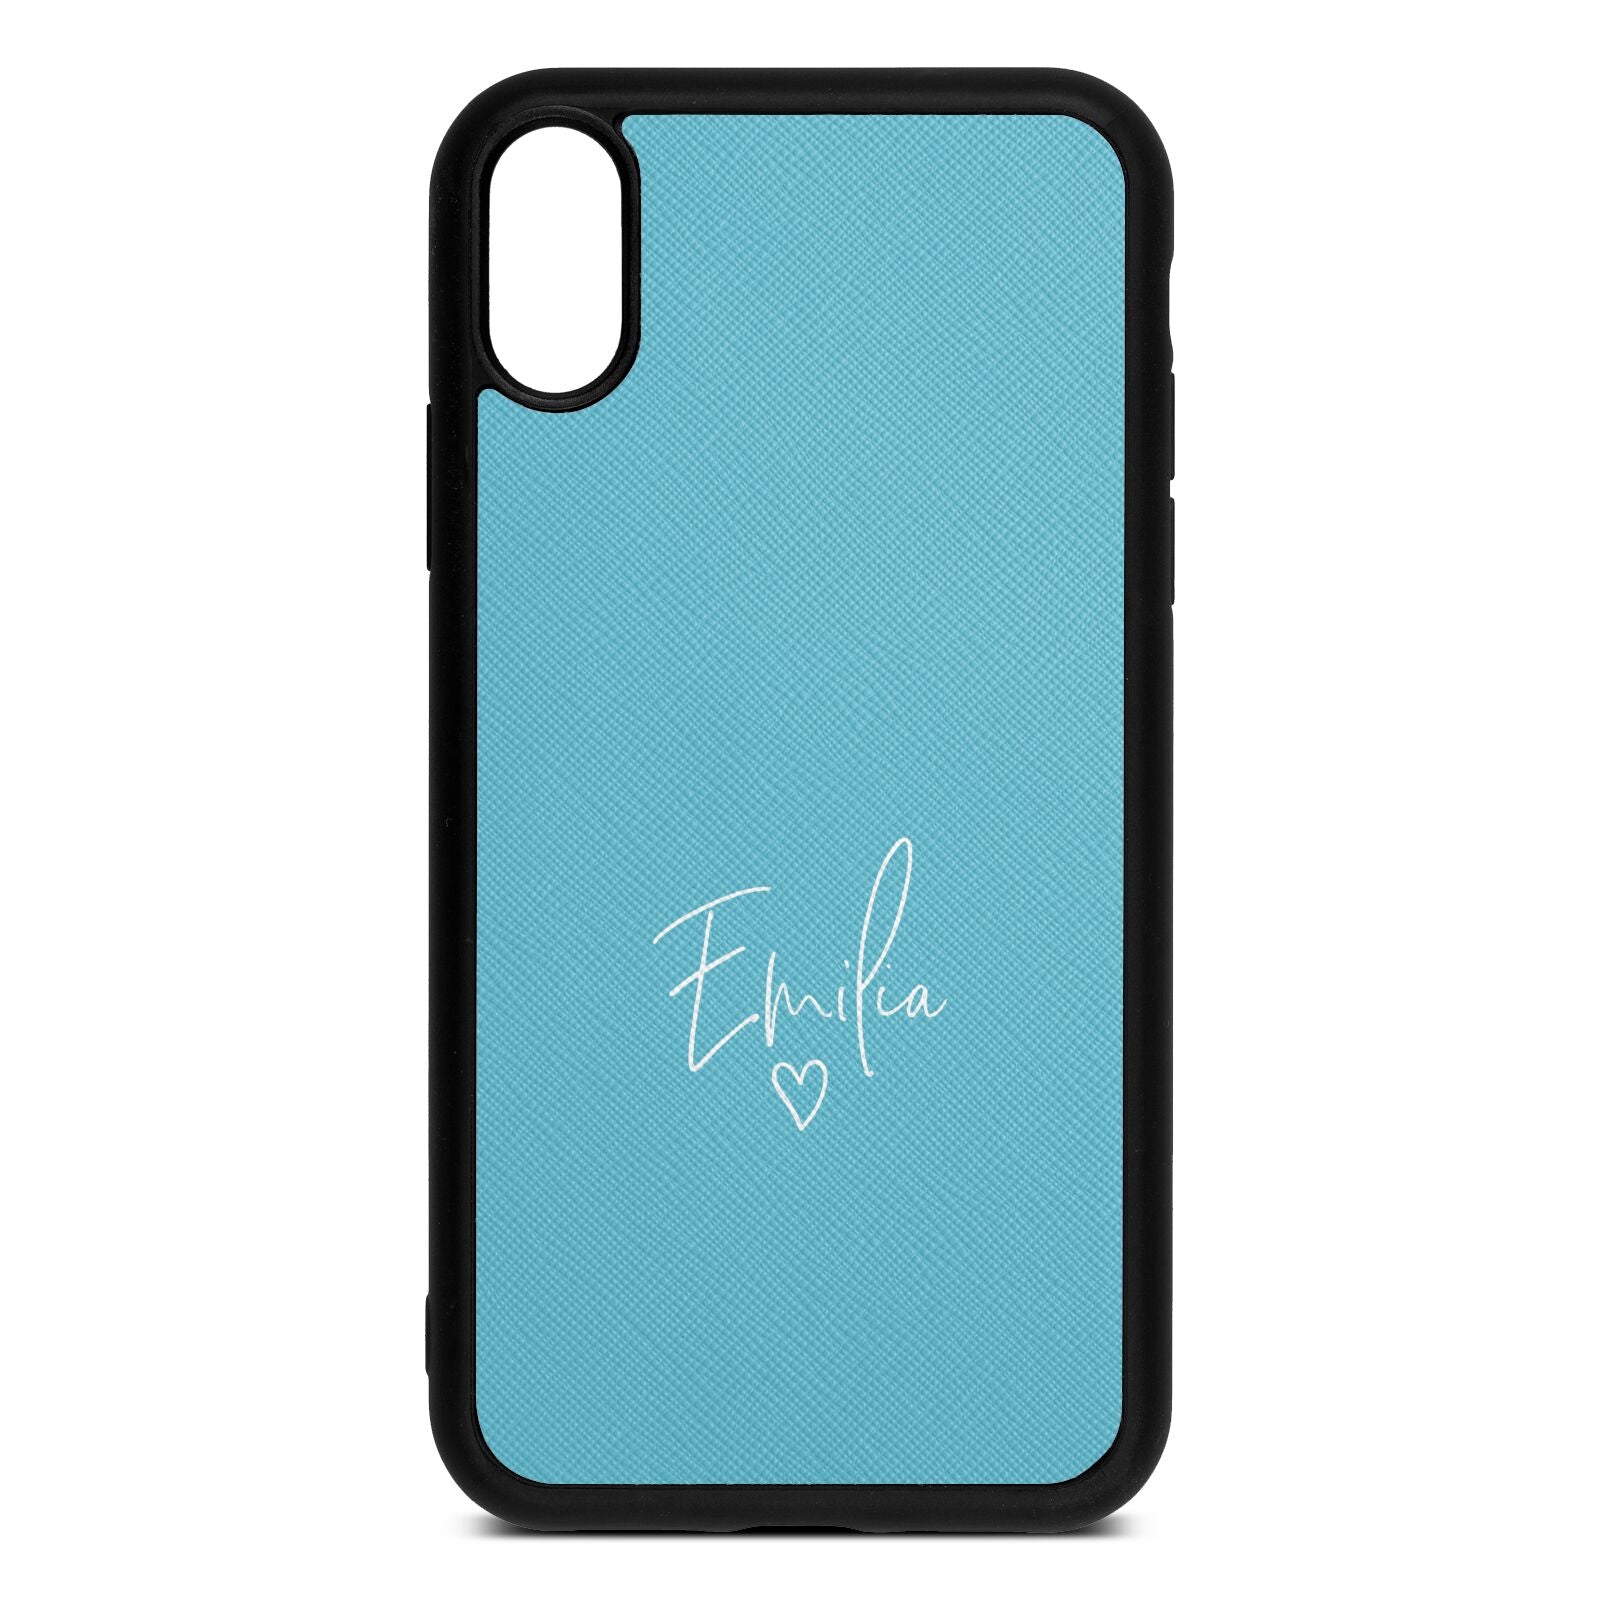 White Handwritten Name Transparent Sky Saffiano Leather iPhone Xr Case